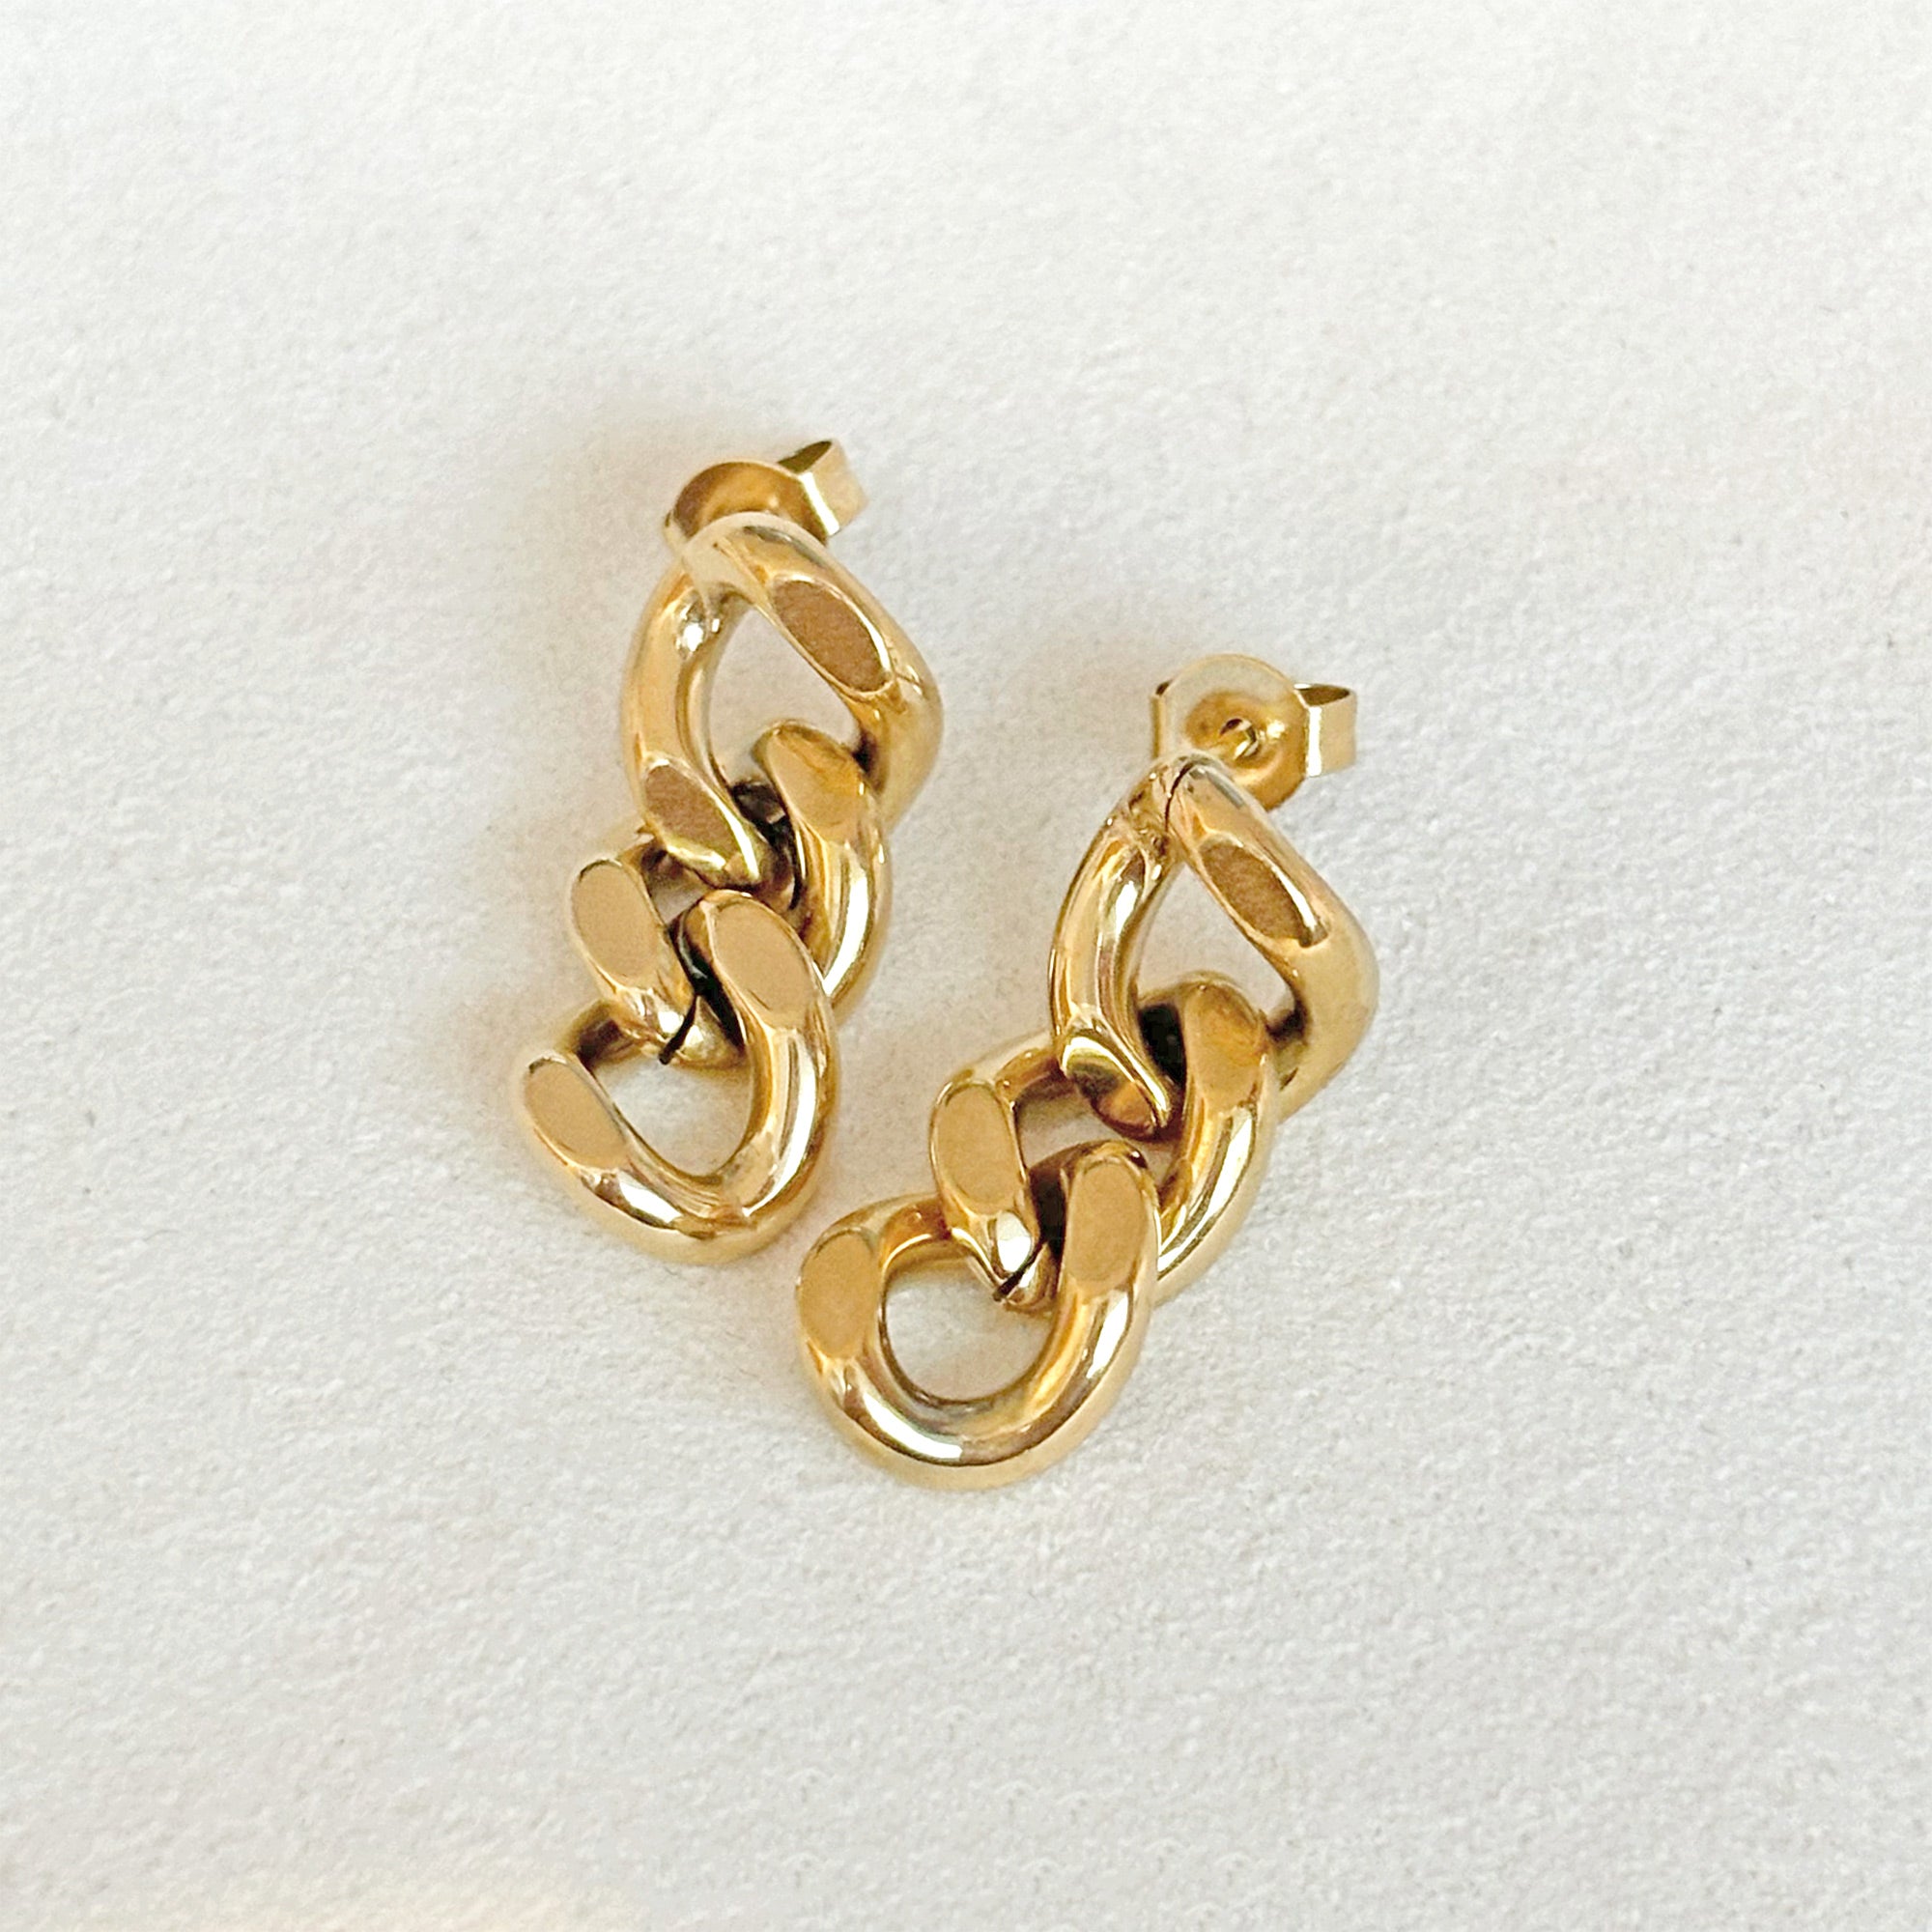 SMALL GOLD LINK CHAIN EARRINGS SAMPLE